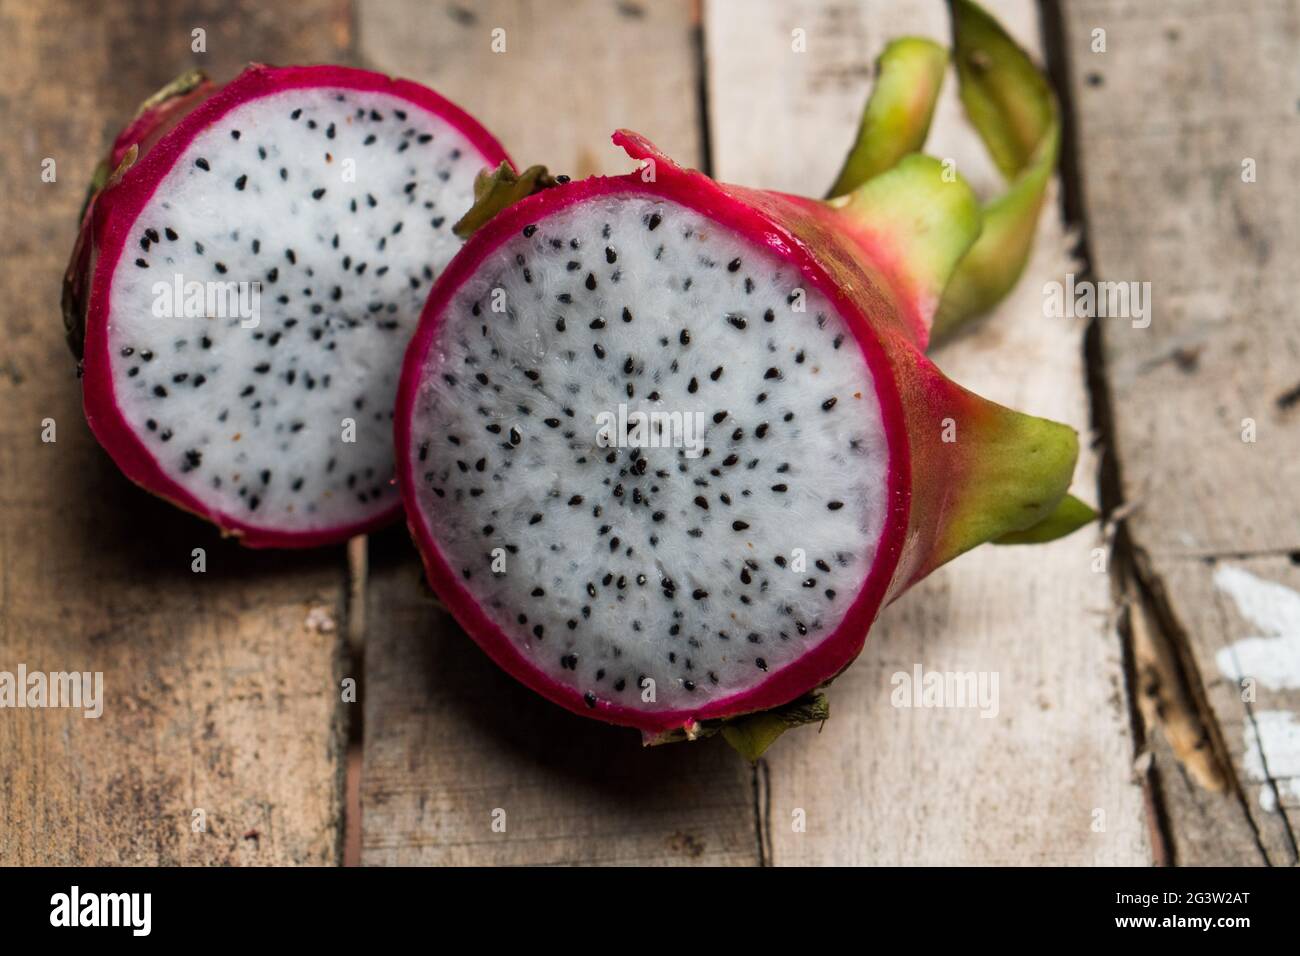 Dragon fruit on the wooden table Stock Photo